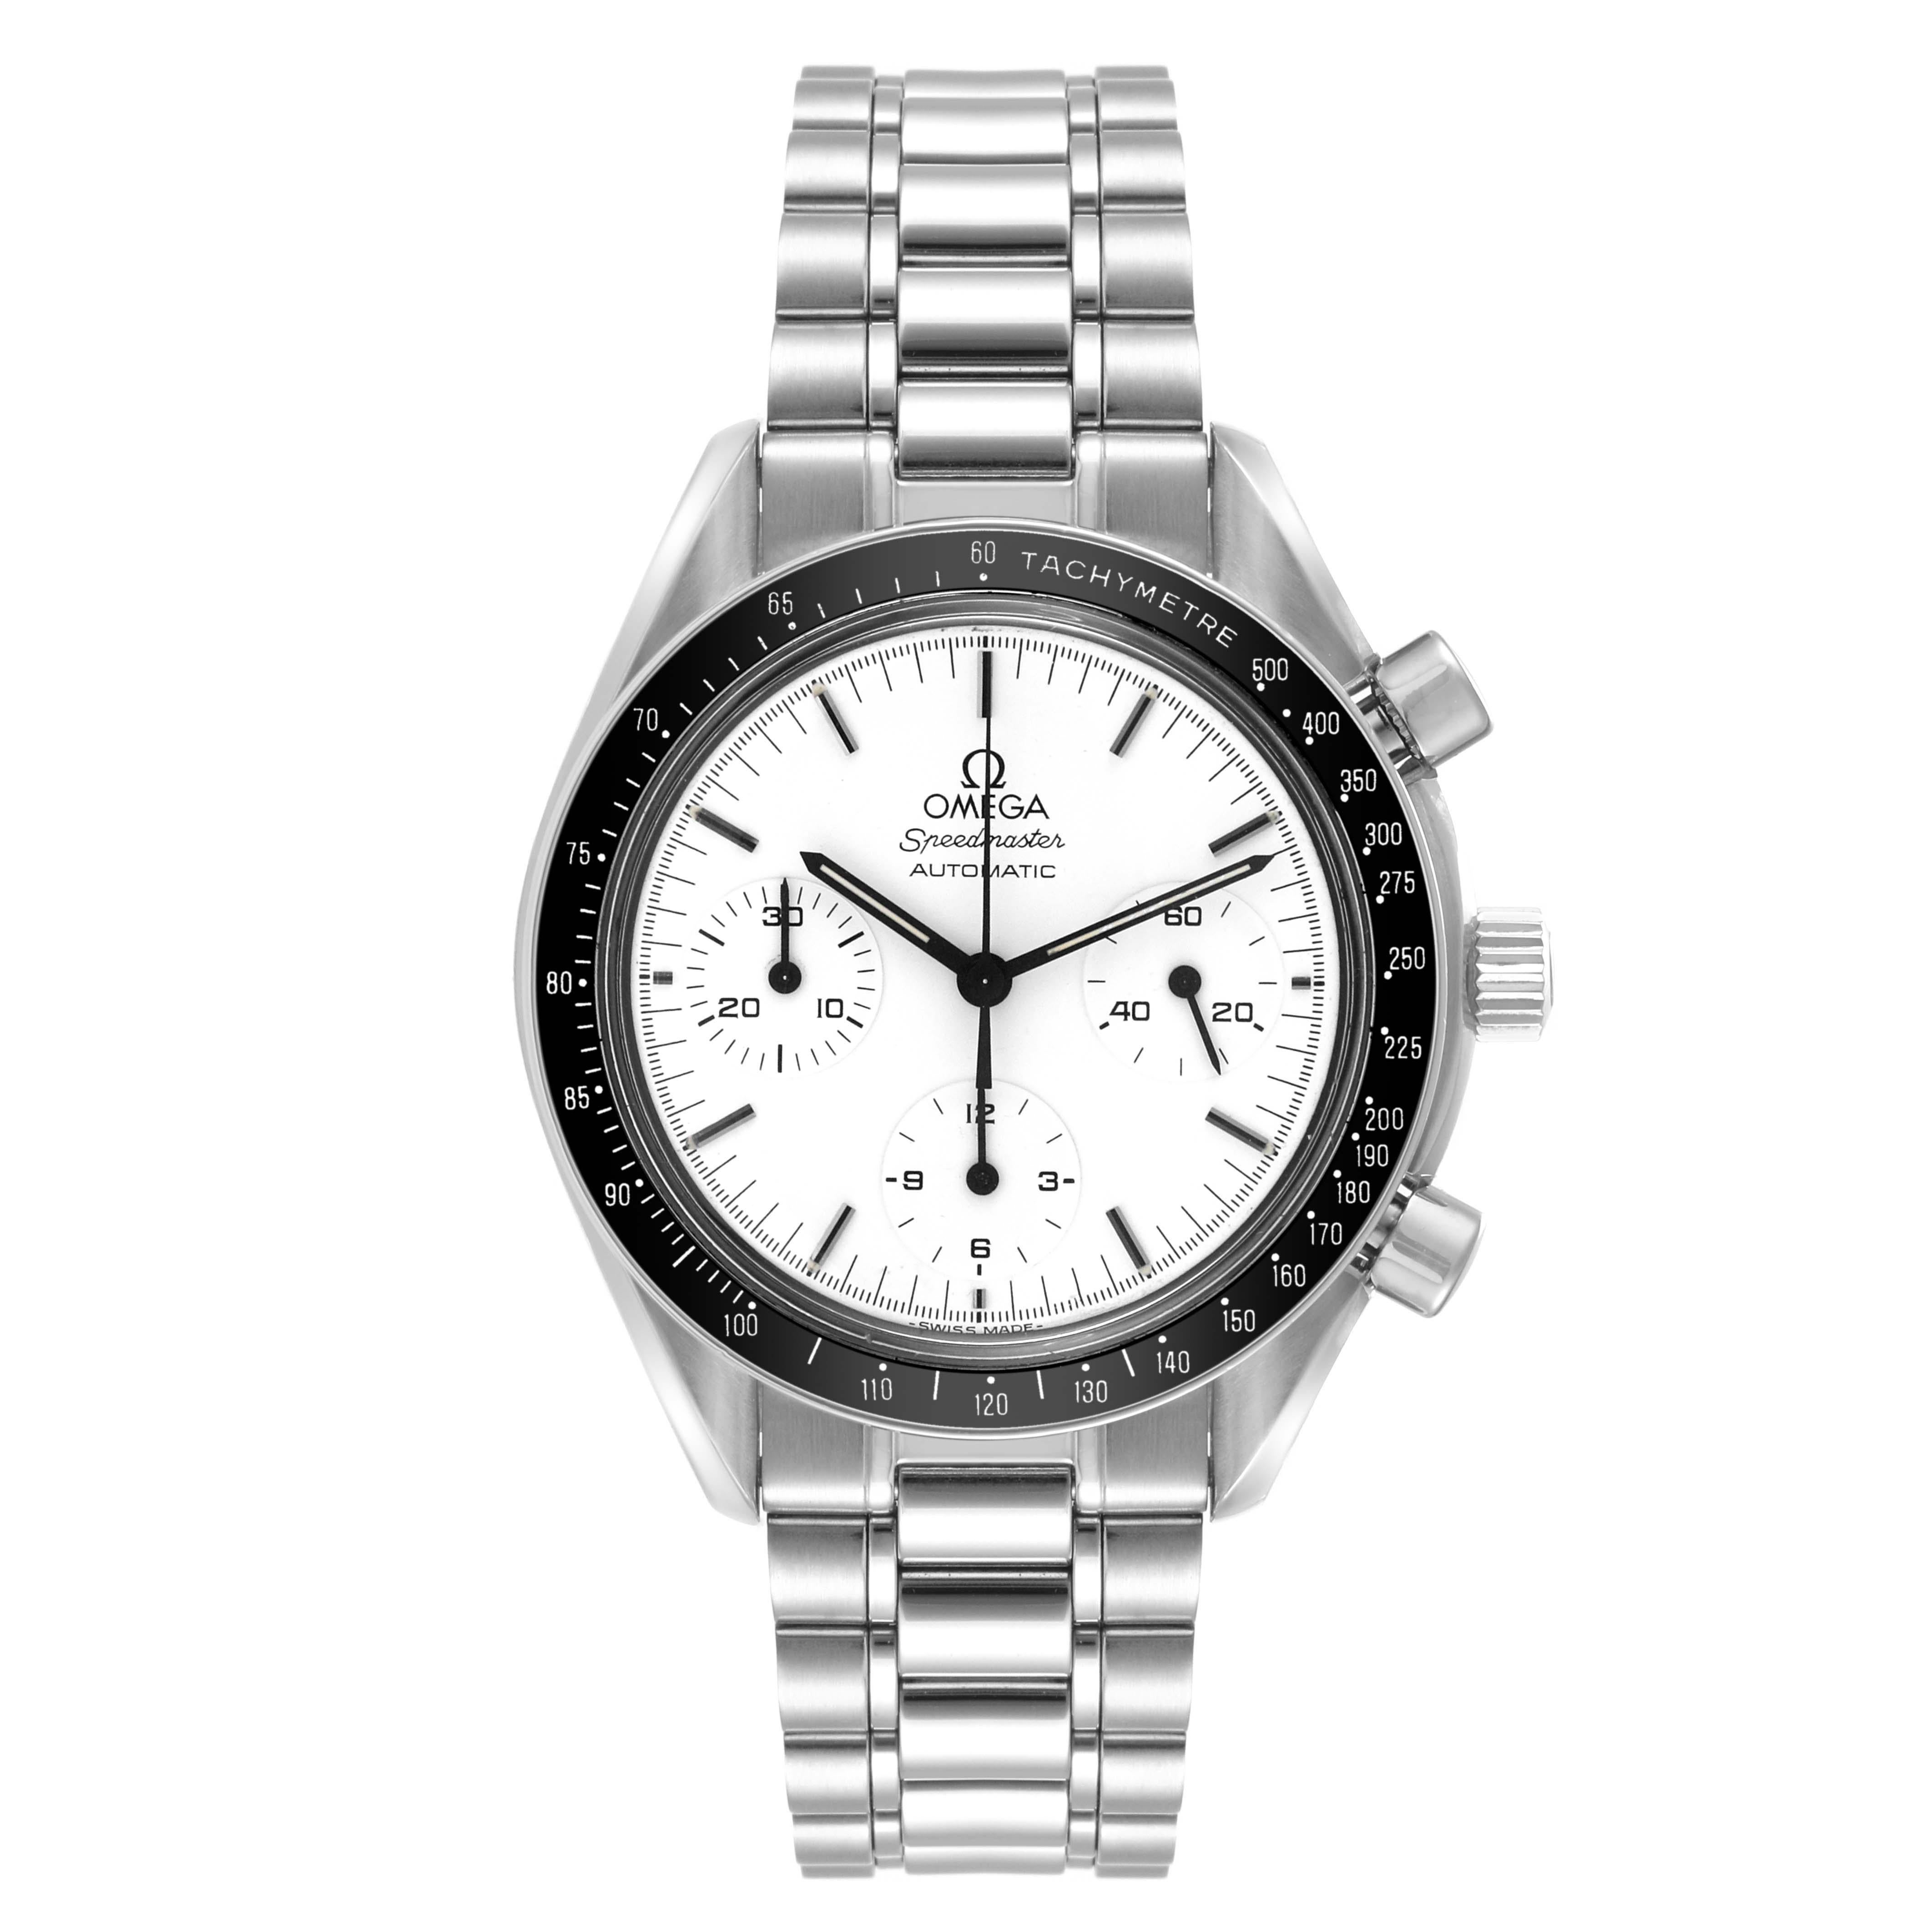 Omega Speedmaster Reduced Albino White Dial Steel Mens Watch 3510.20.00. Automatic self-winding chronograph movement. Stainless steel round case 39 mm in diameter. Black bezel with tachymetre function. Hesalite acrylic crystal. White dial with